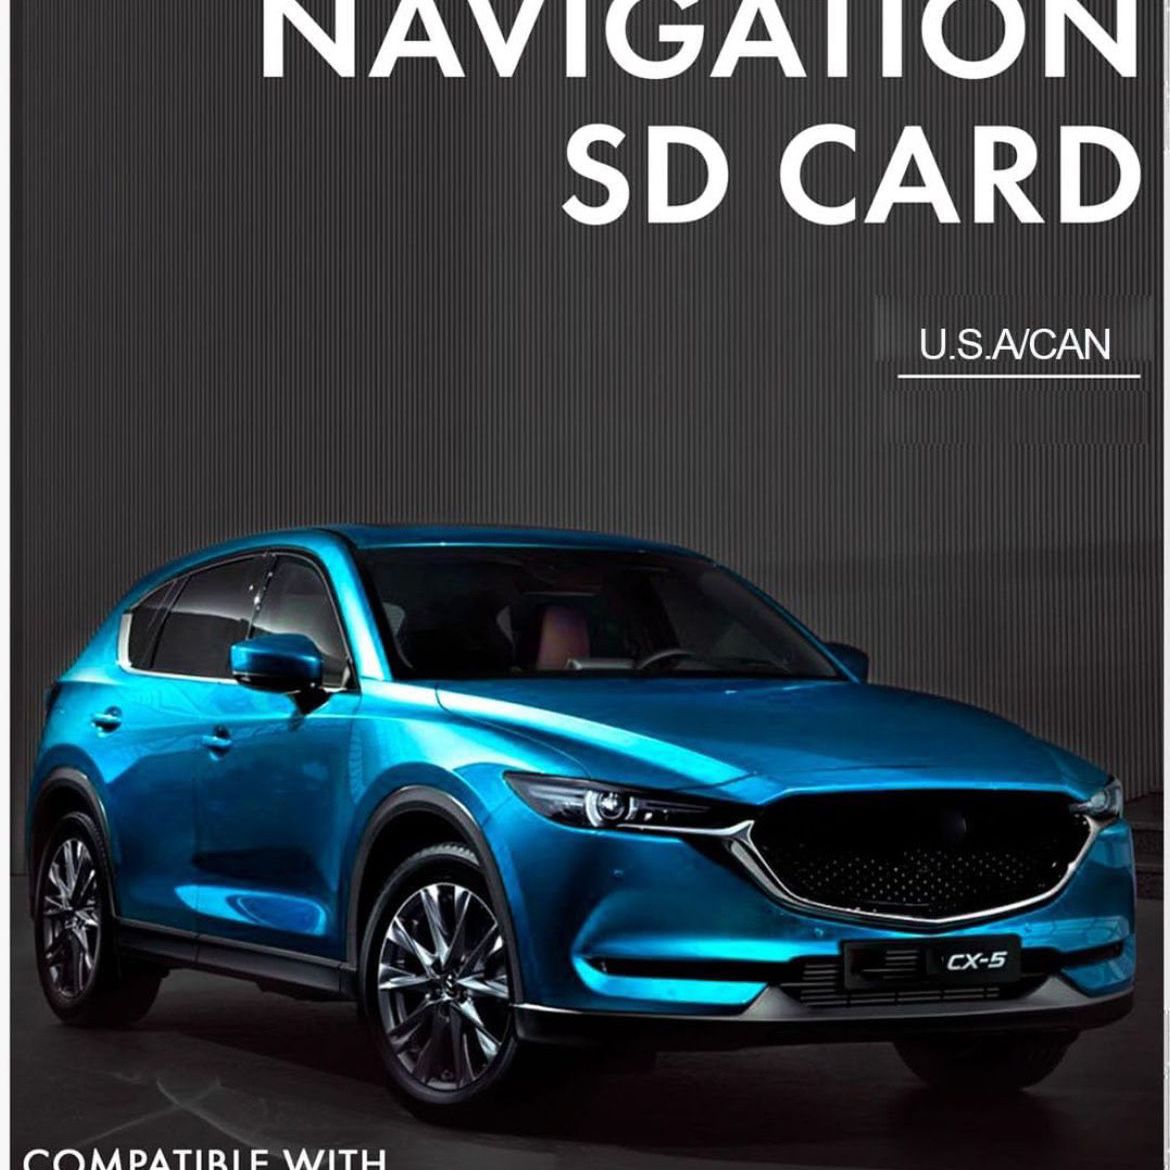  Mazda Navigation SD Card Chip Updated 2023 Maps USA/Mex/Can